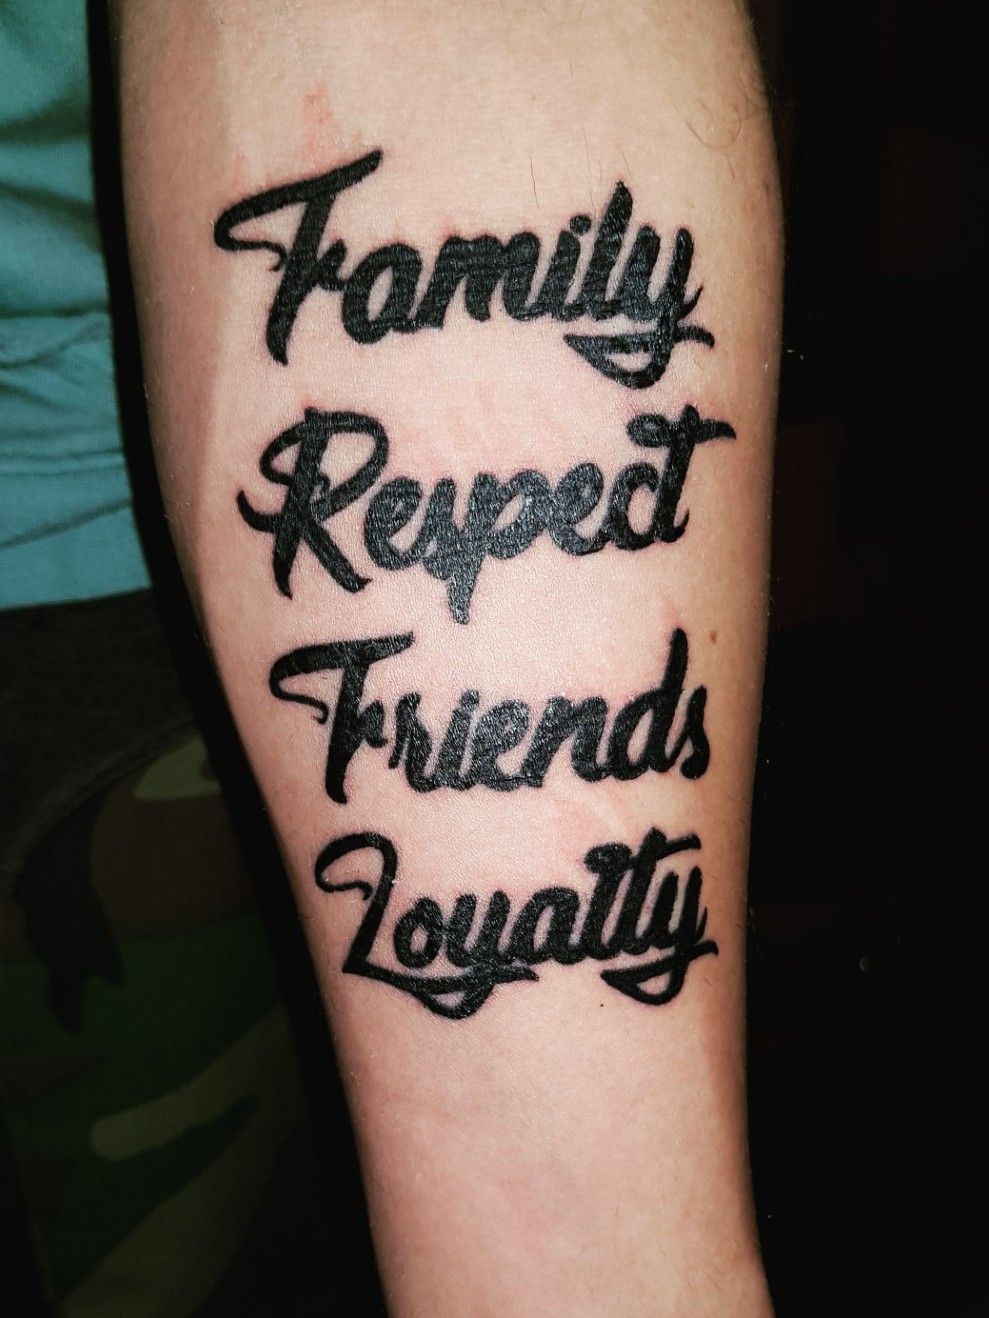 17 Loyalty Tattoo Ideas For Women And Their Meaning  Moms Got the Stuff